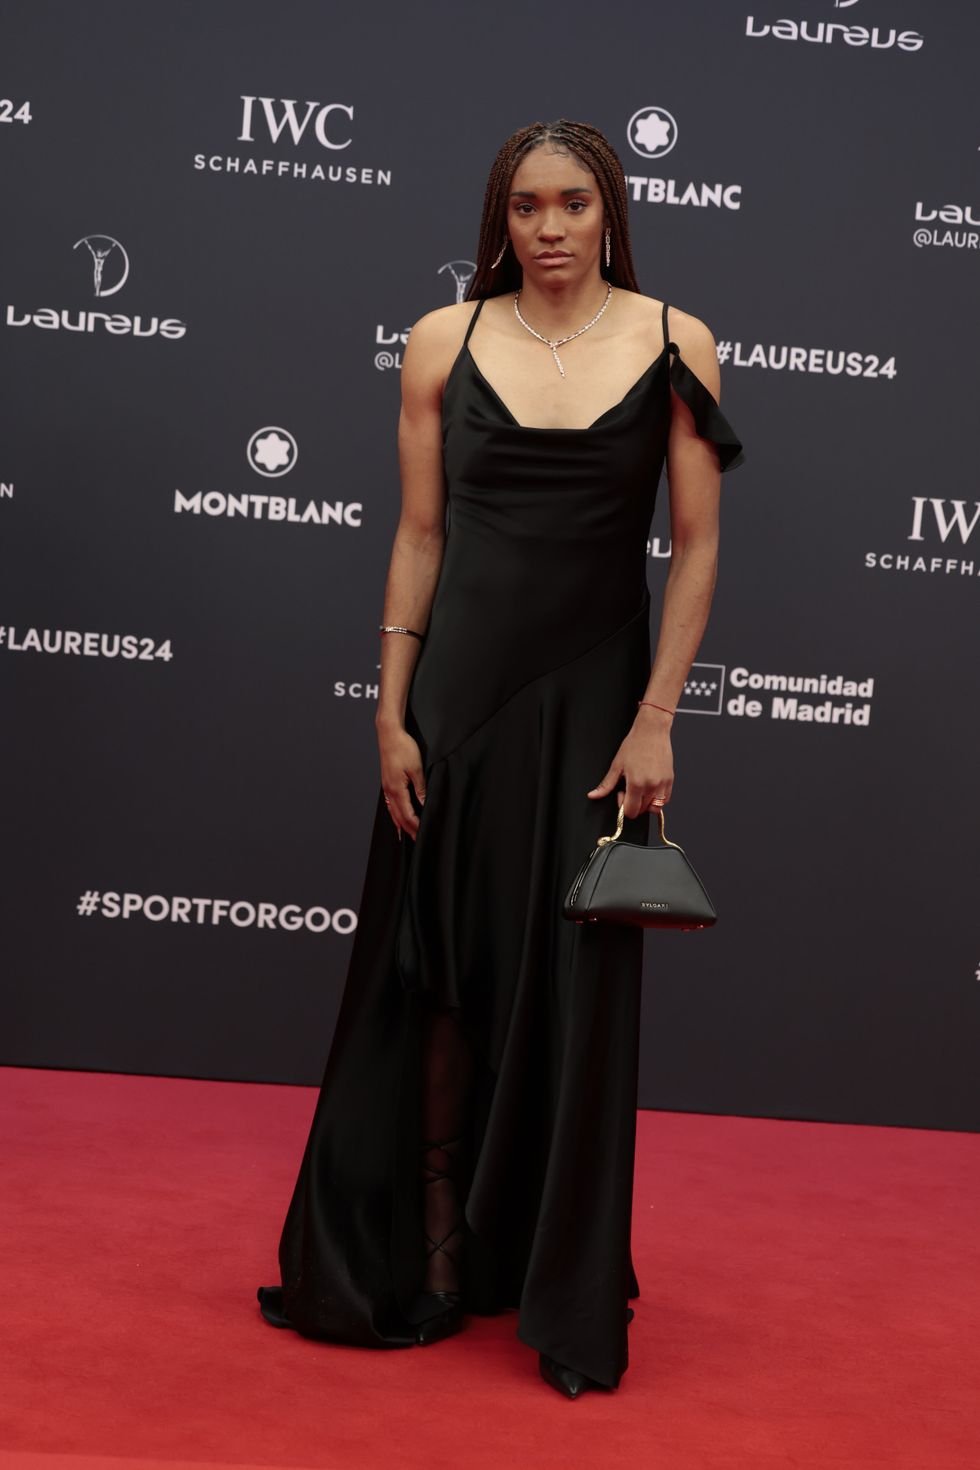 soccerplayer salma paralluelo at photocall for laureus awards 2024 in madrid on monday, 22 april 2024